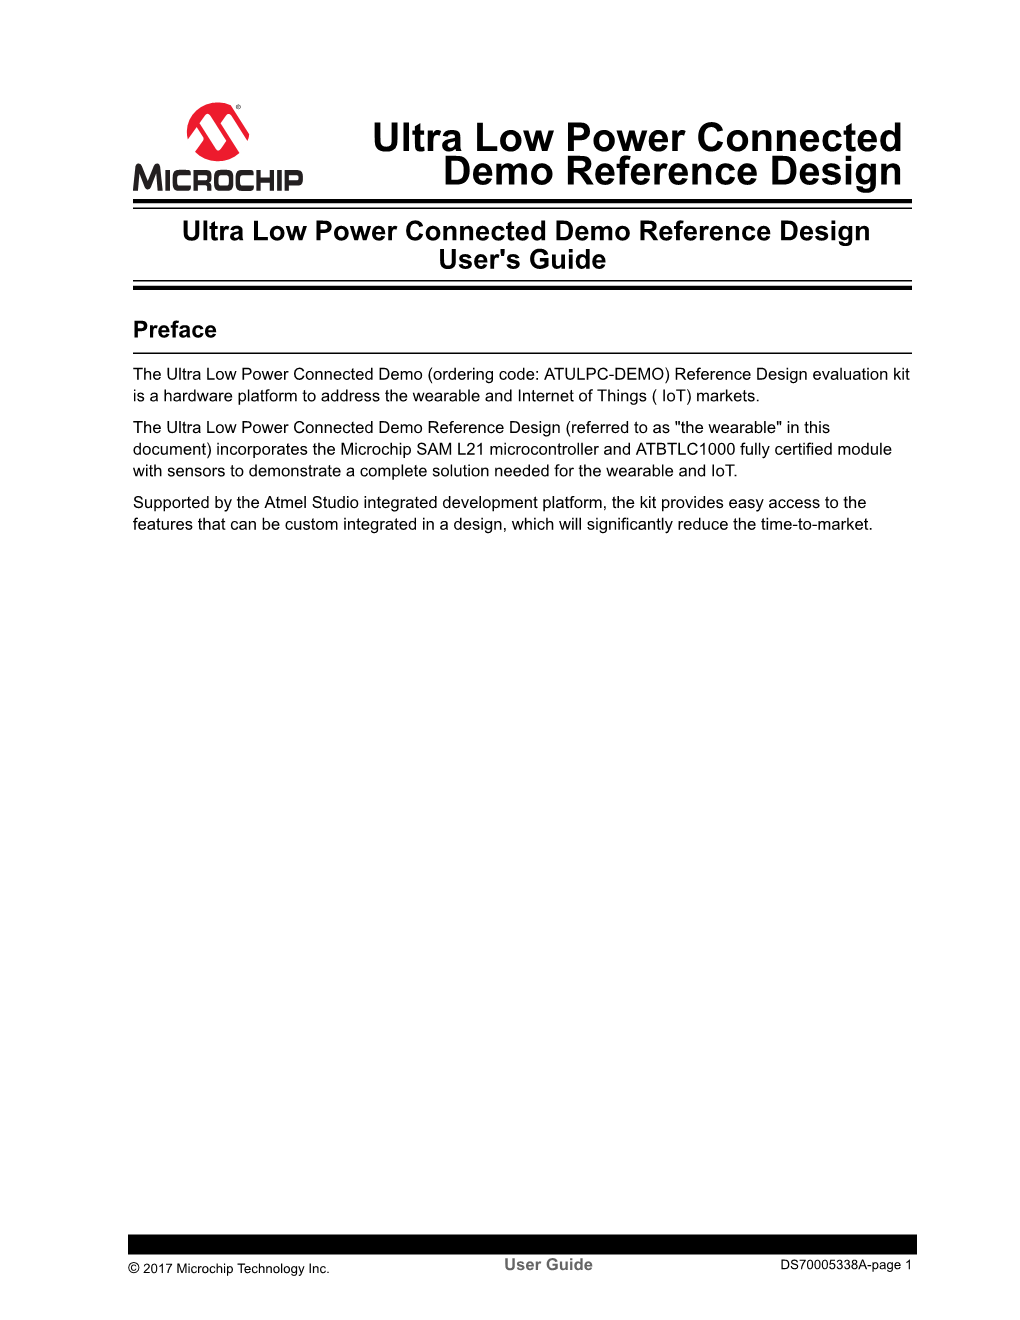 Ultra Low Power Connected Demo Reference Design User's Guide